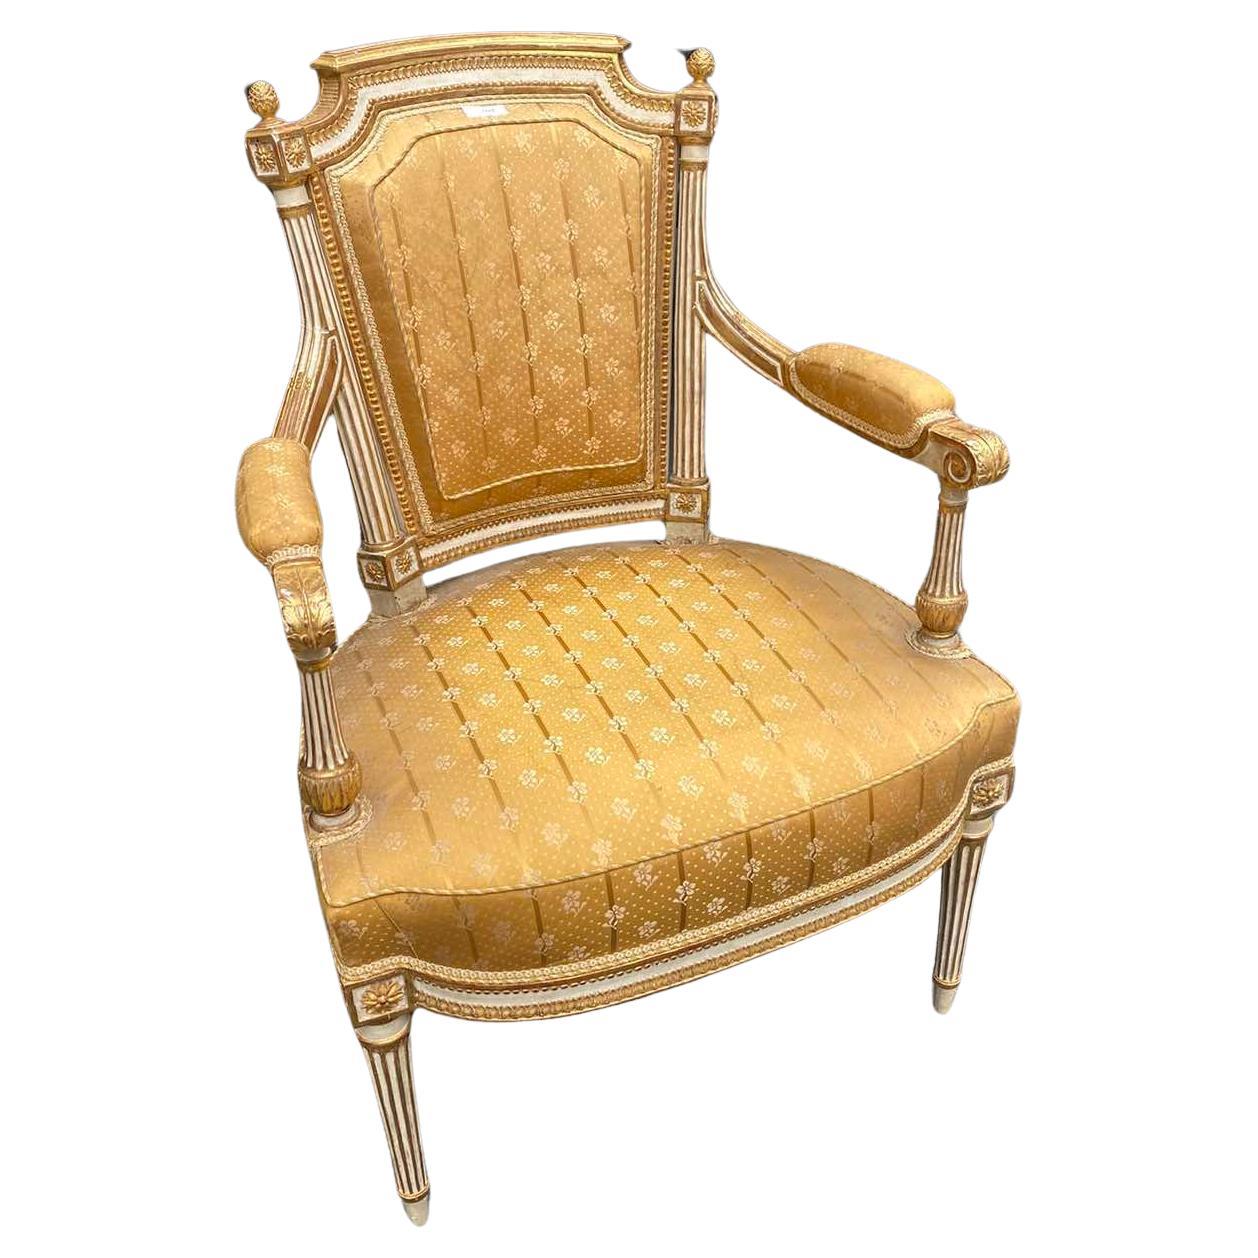 Rare authentic armchair made by Jean-Baptiste Boulard in the late 18th century. It is a very lovely piece hand carved and hand painted with great details upholstered in yellow to golden silk by Lelievre. Very good condition with no